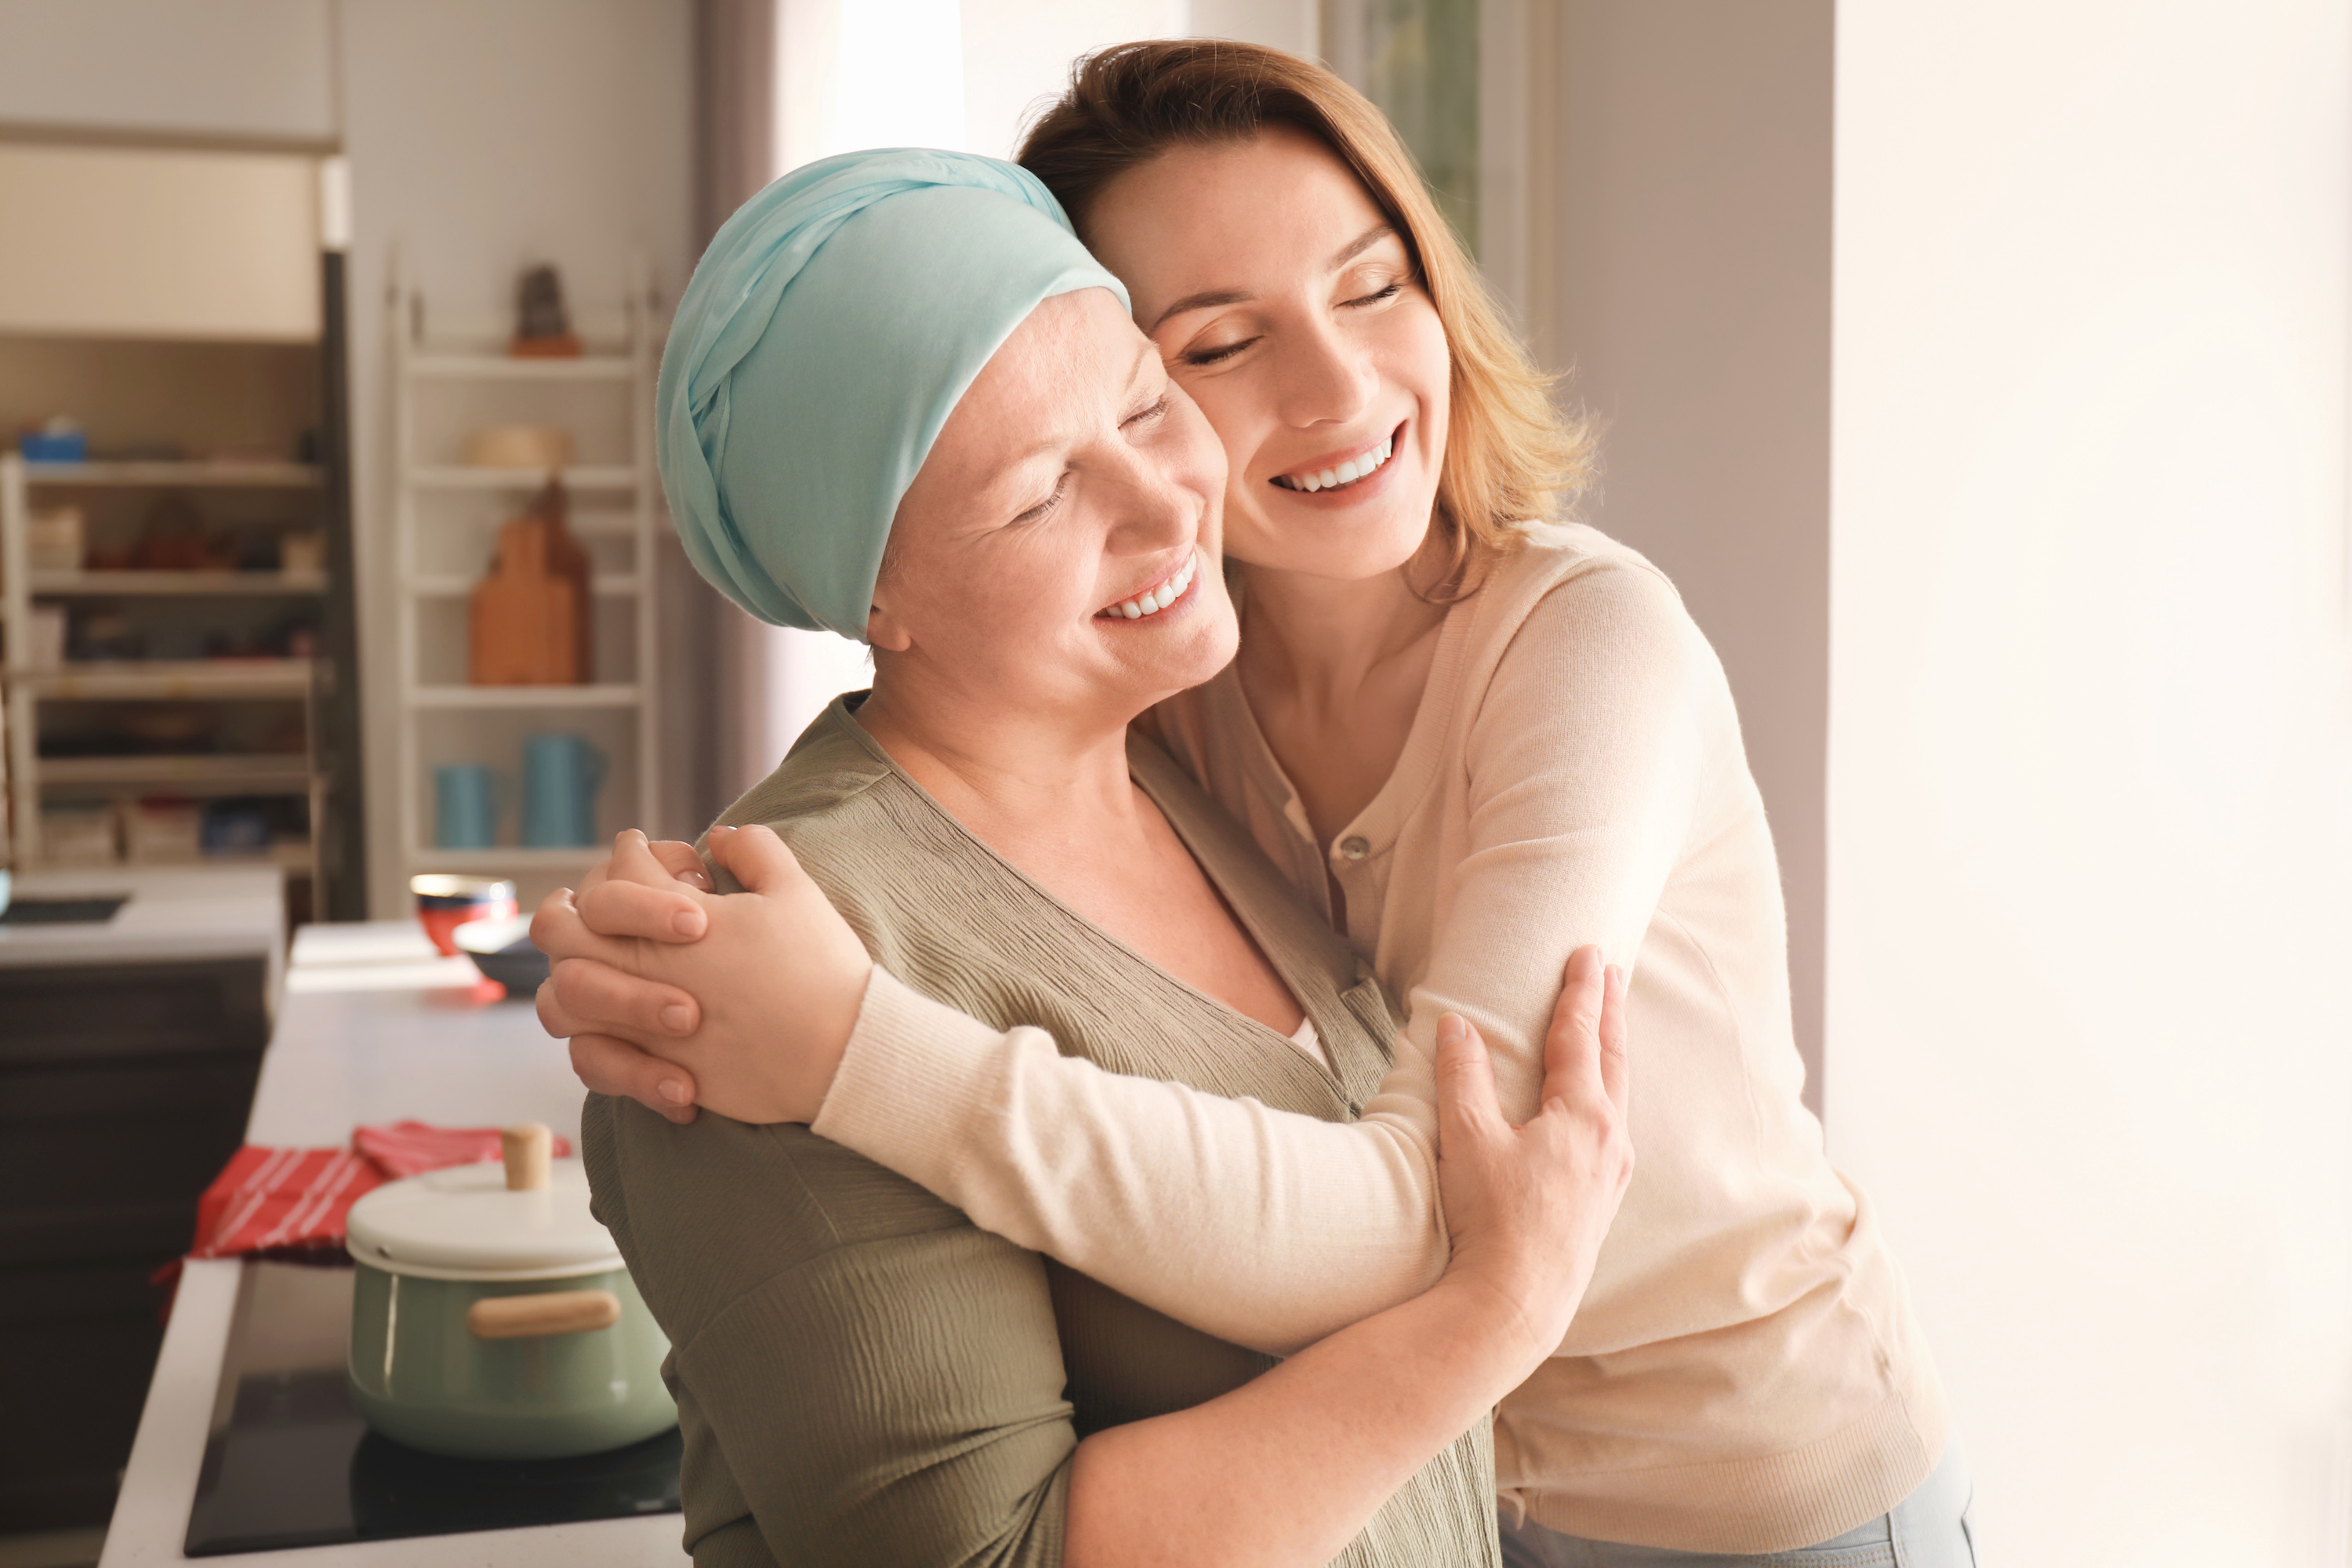 Support Services Available Locally for Cancer Survivors